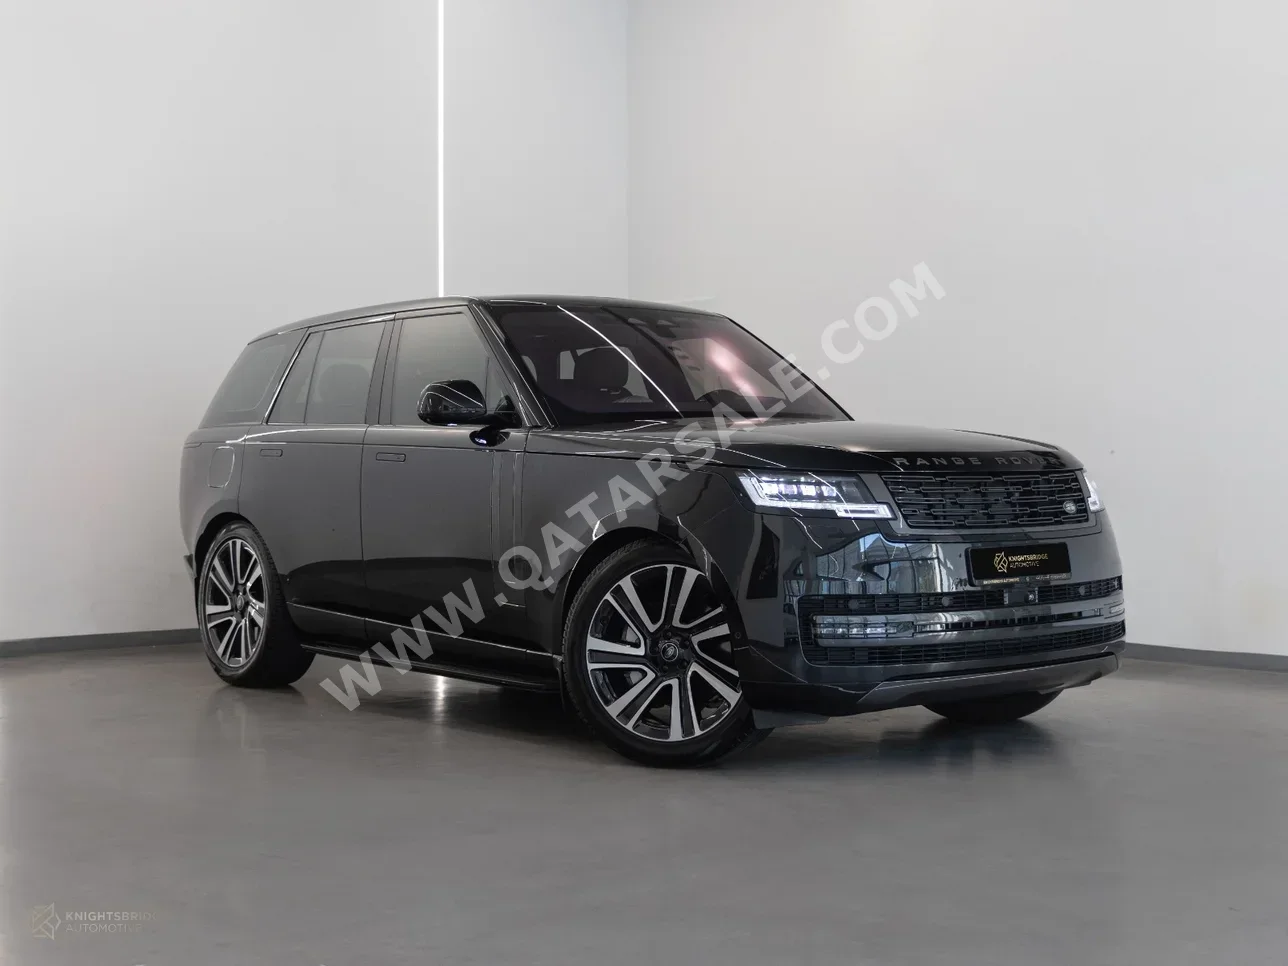  Land Rover  Range Rover  Vogue SE  2023  Automatic  16,700 Km  6 Cylinder  Four Wheel Drive (4WD)  SUV  Black  With Warranty